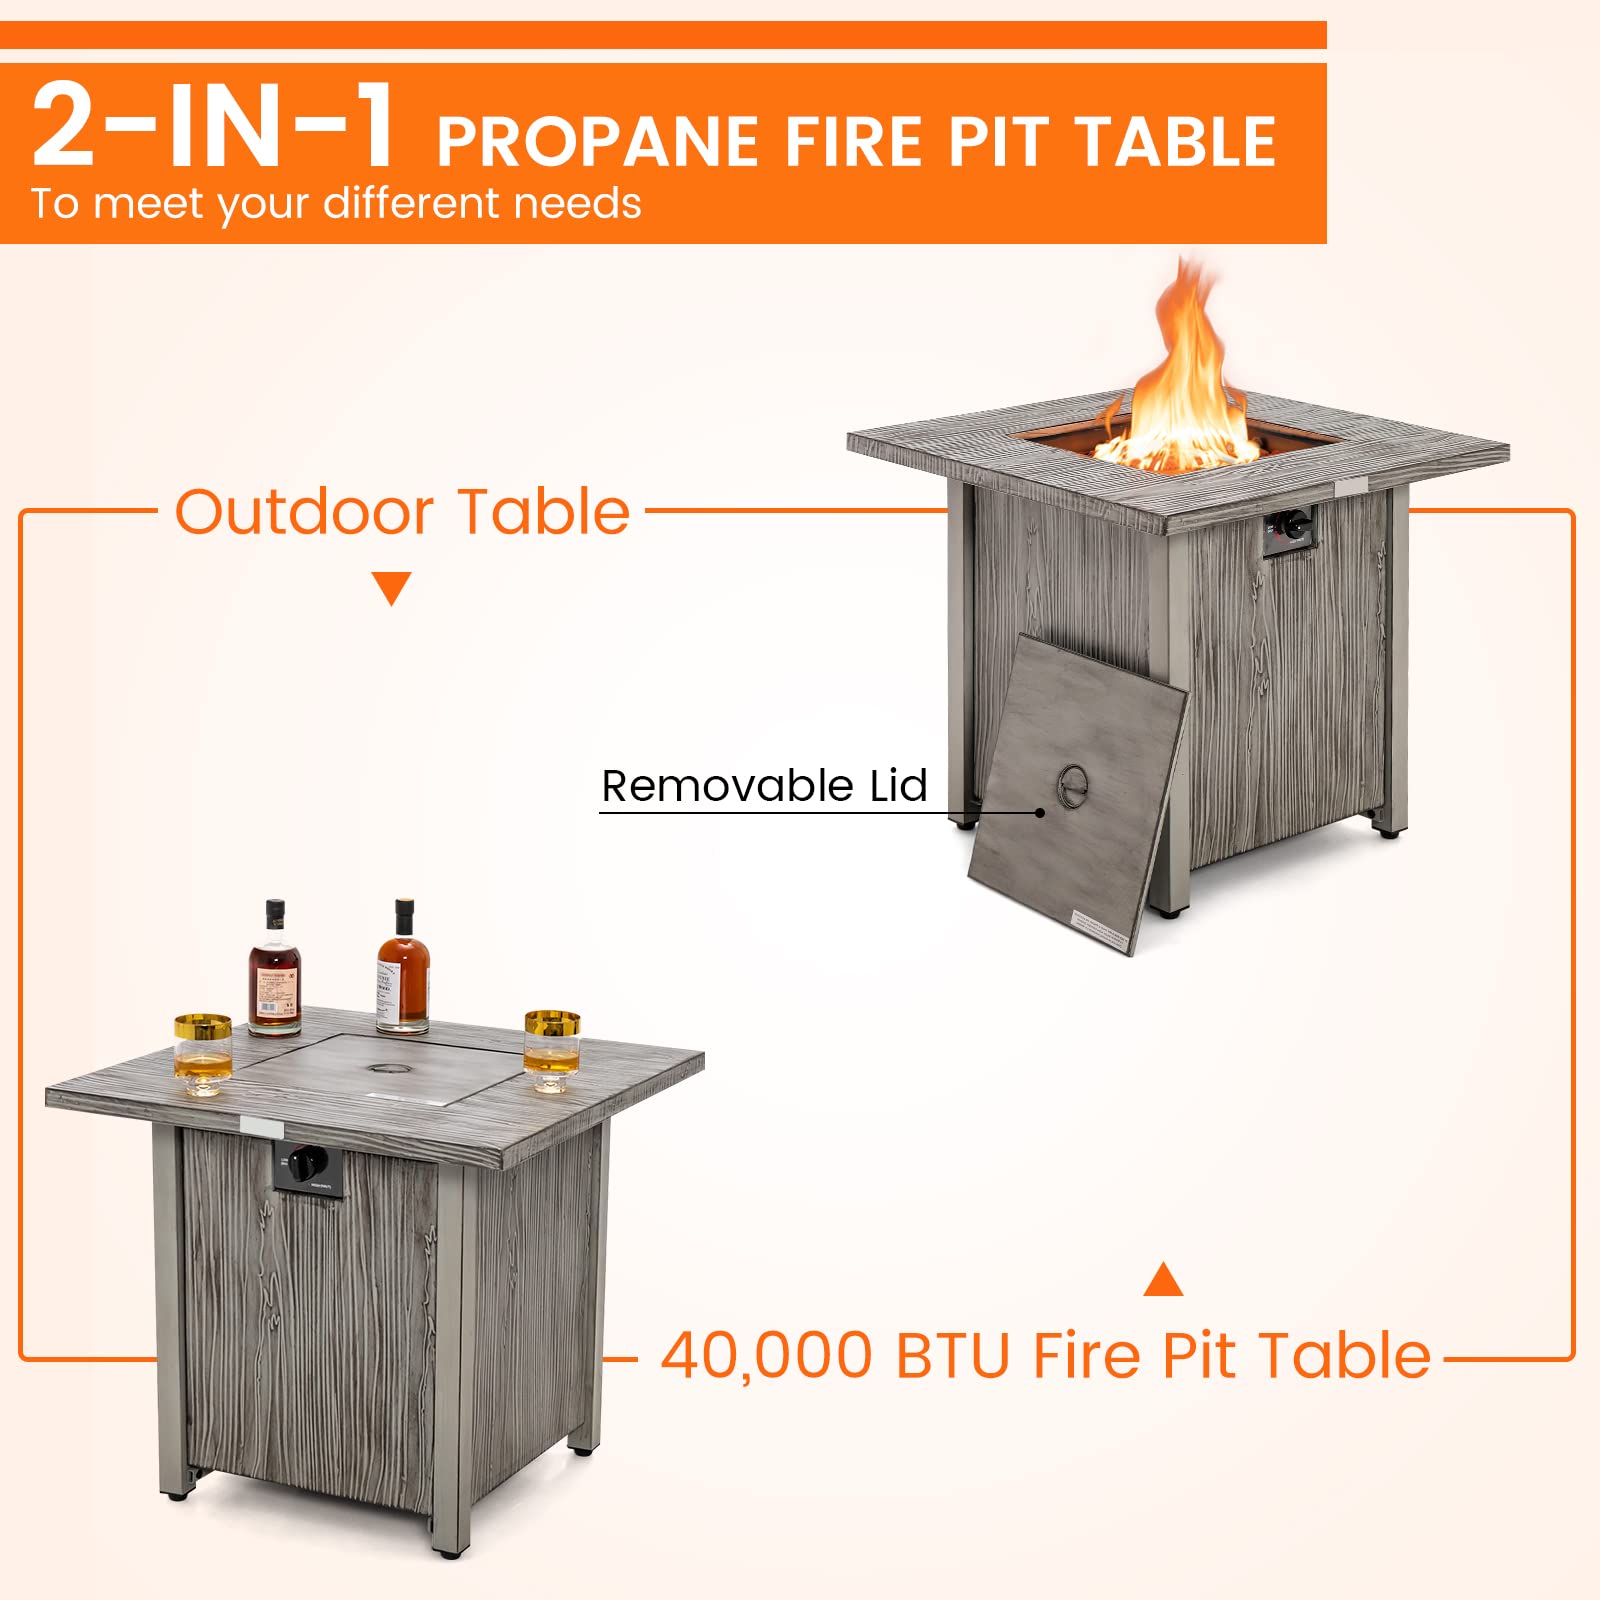 HAPPYGRILL 28” Propane Fire Pit Table, 40,000 BTU Outdoor Propane Gas Fire Table with Wood-Like Tabletop, Lid and Lava Rocks, Square Auto-Ignition Propane Firepit with PVC Cover